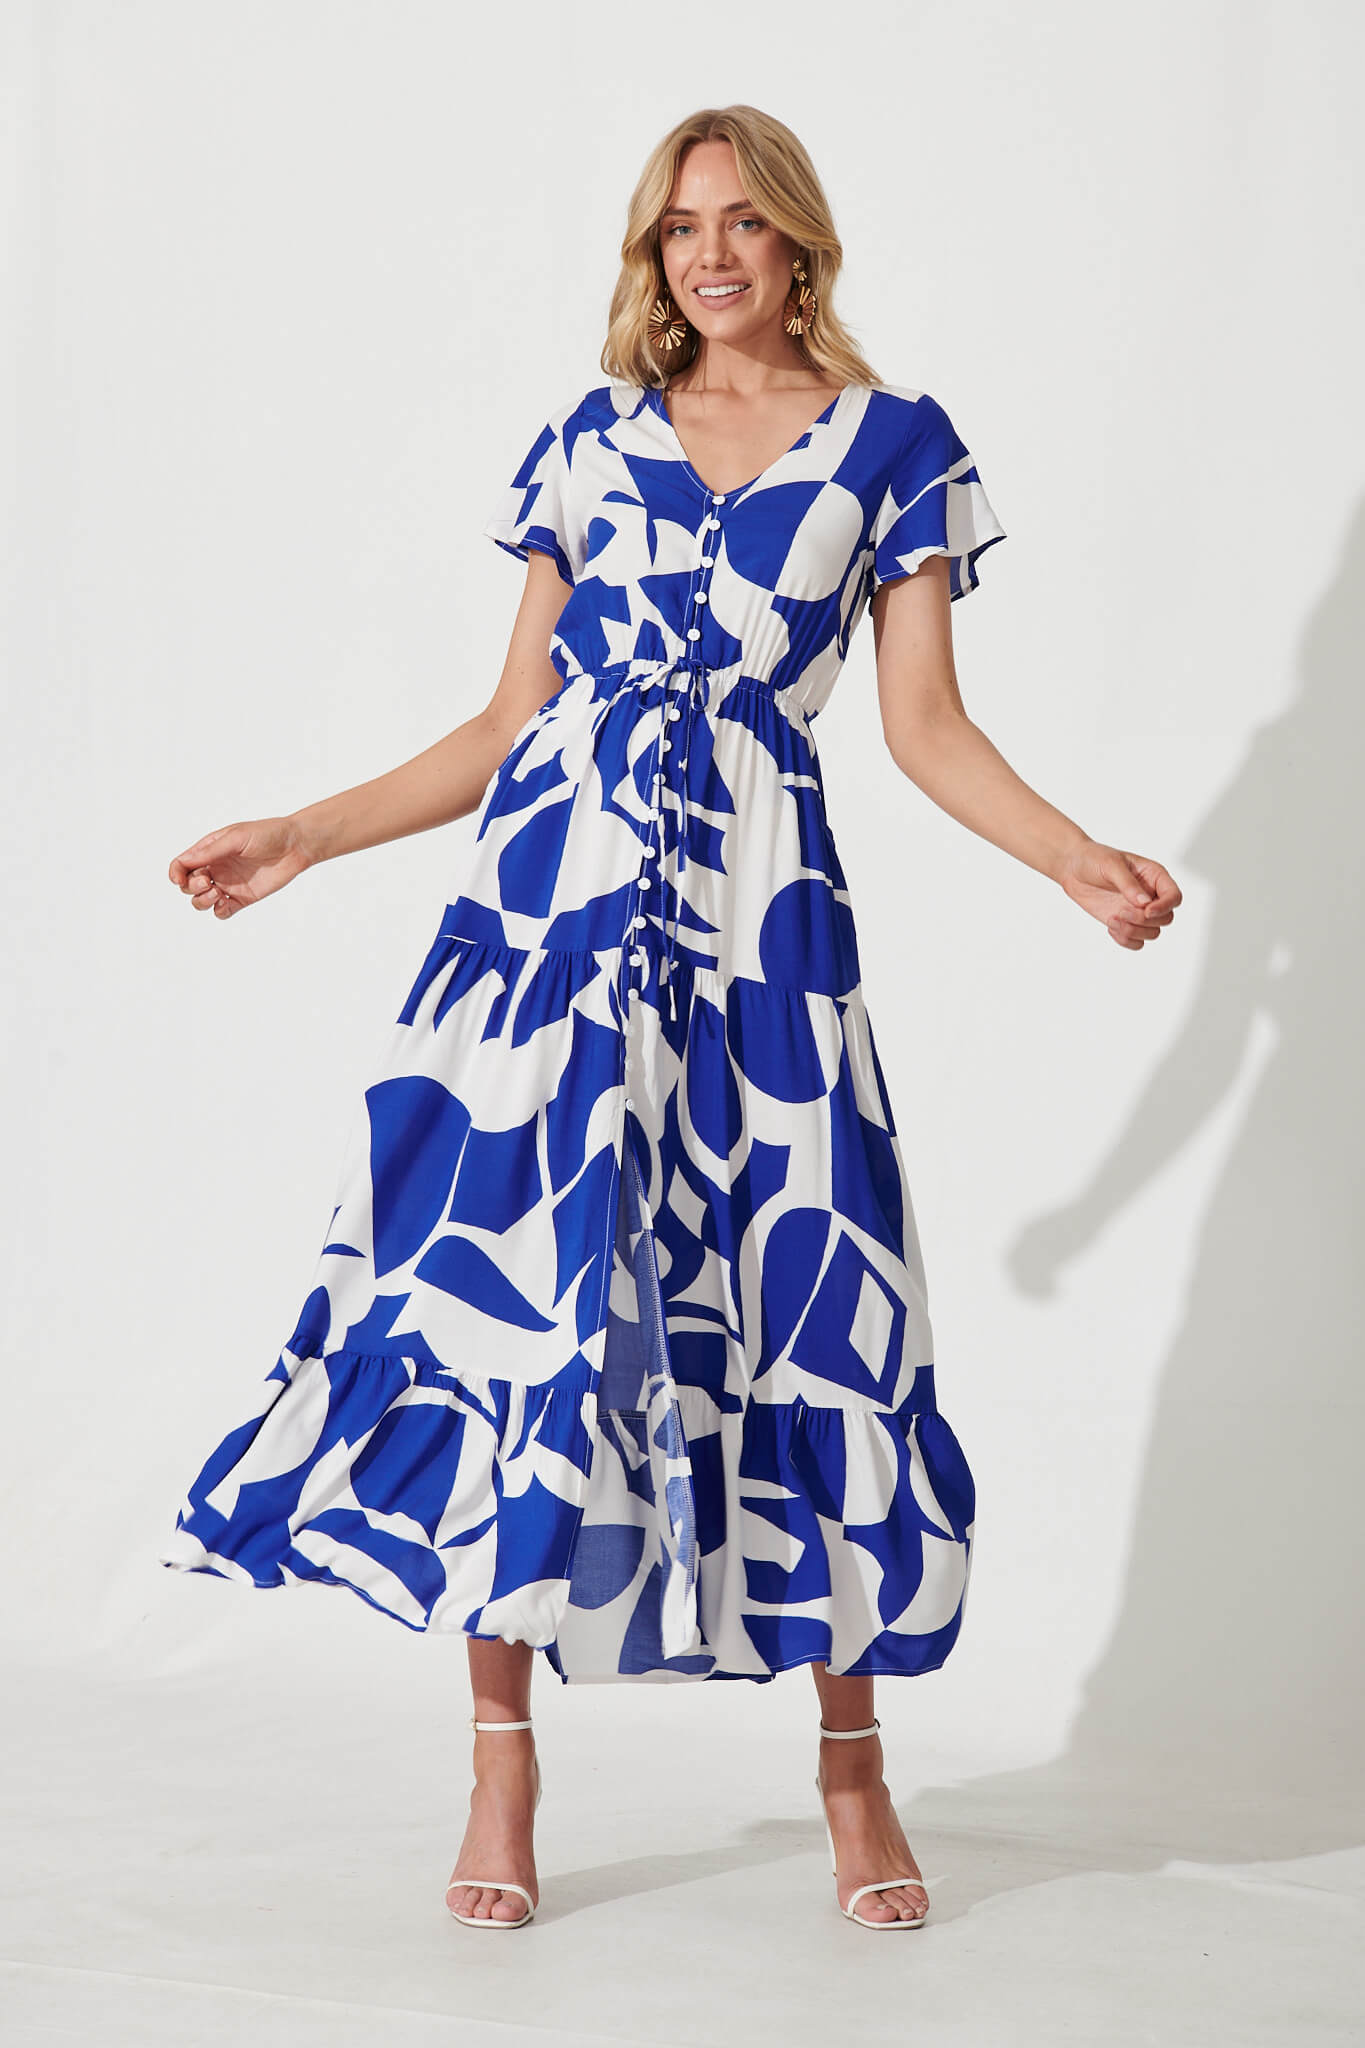 Clairie Maxi Dress In Cobalt With White Geometric Print - full length